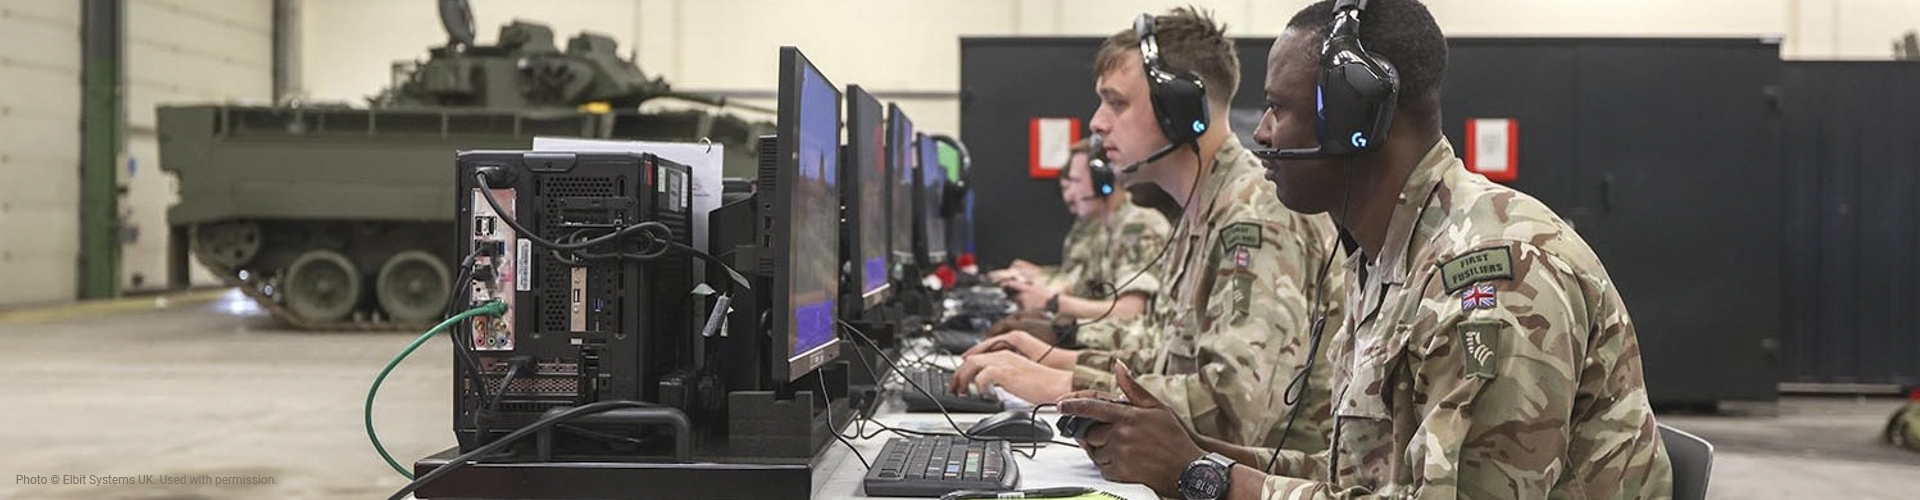 bisims_dvs2_software_integrated_by_elbit_systems_uk_for_the_british_army